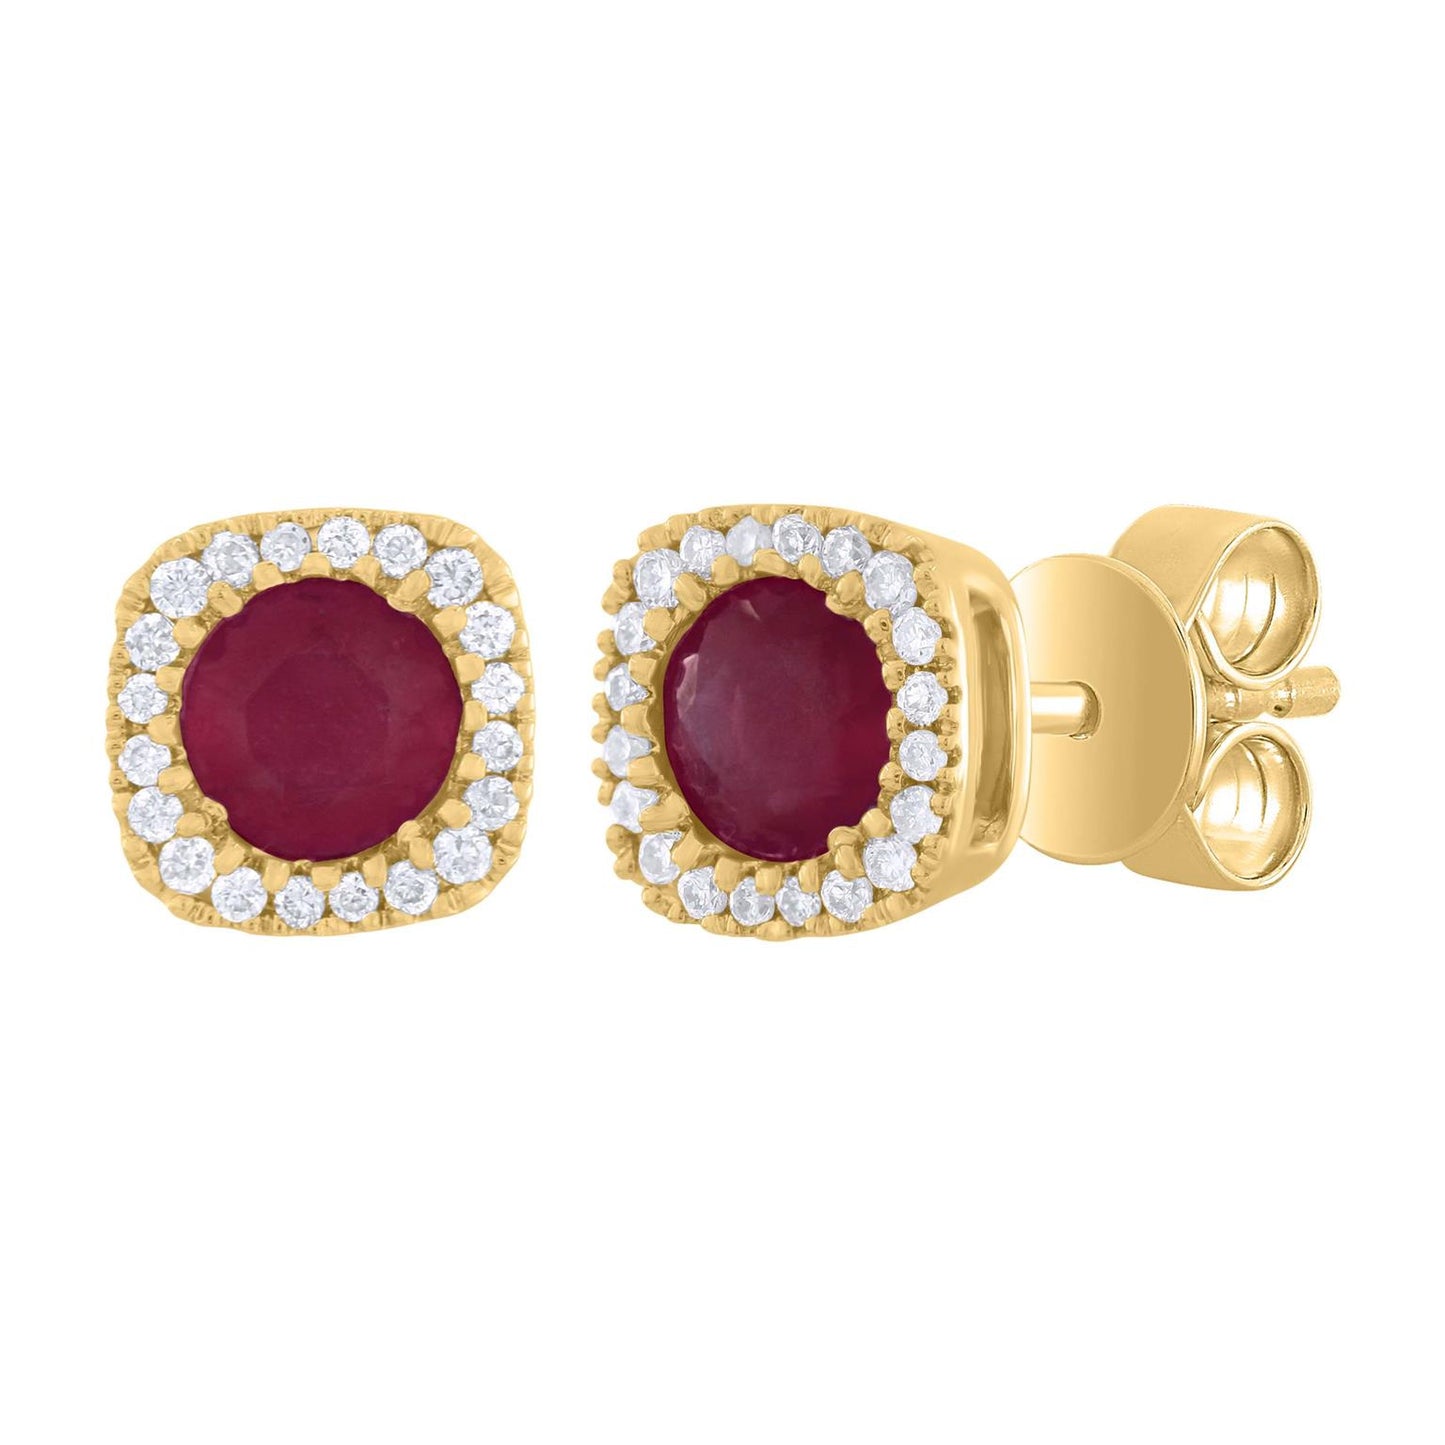 14K Gold Color Stone with Diamonds Earrings